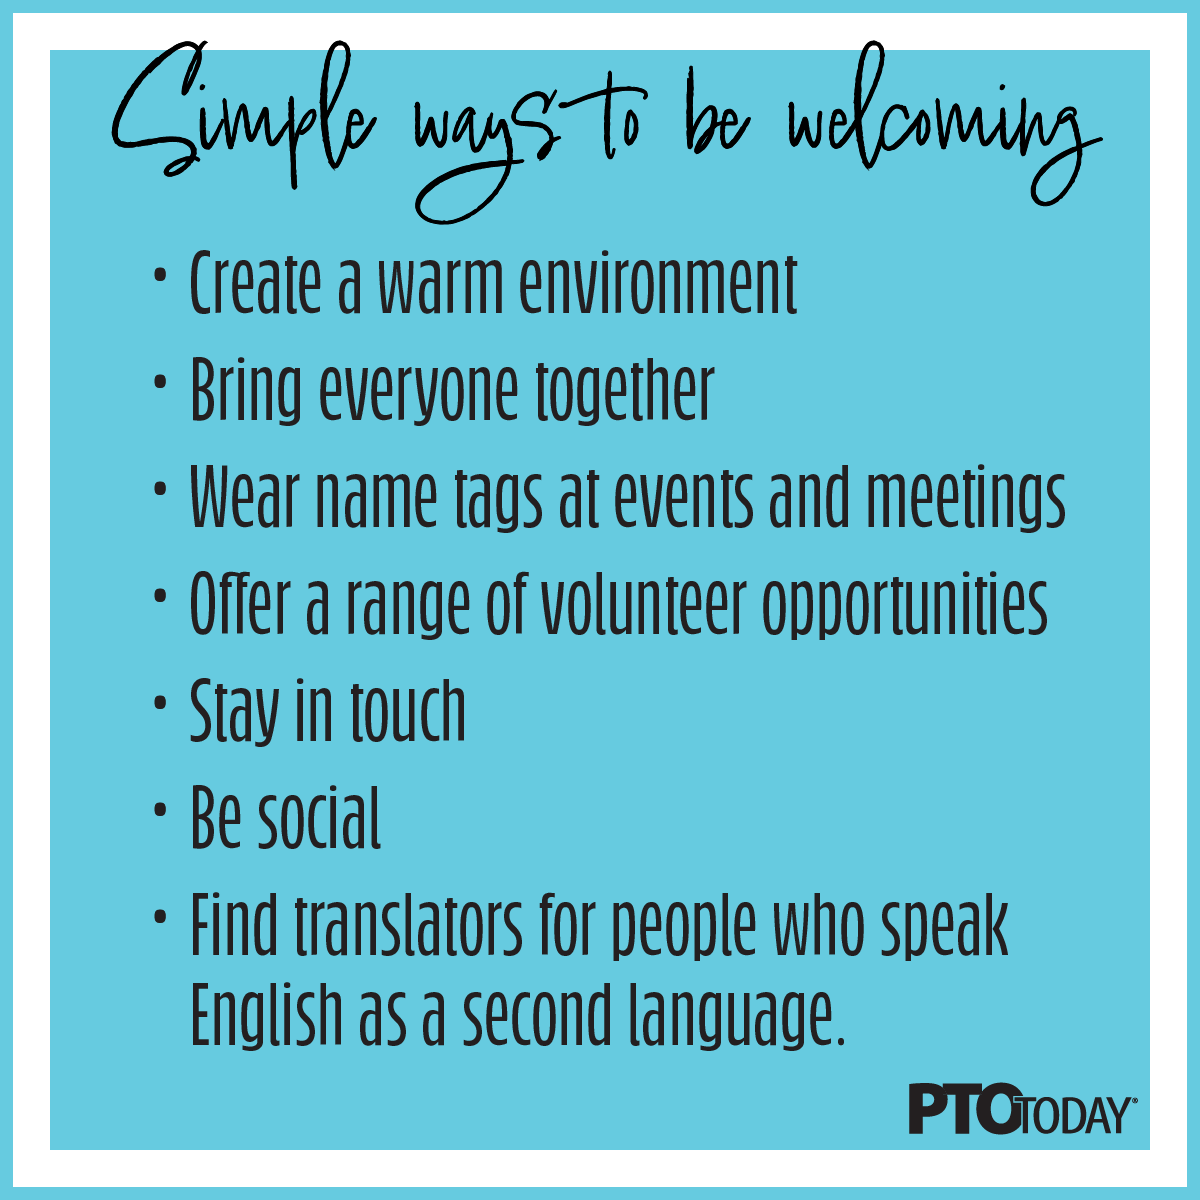 Make Your School a Welcoming Community